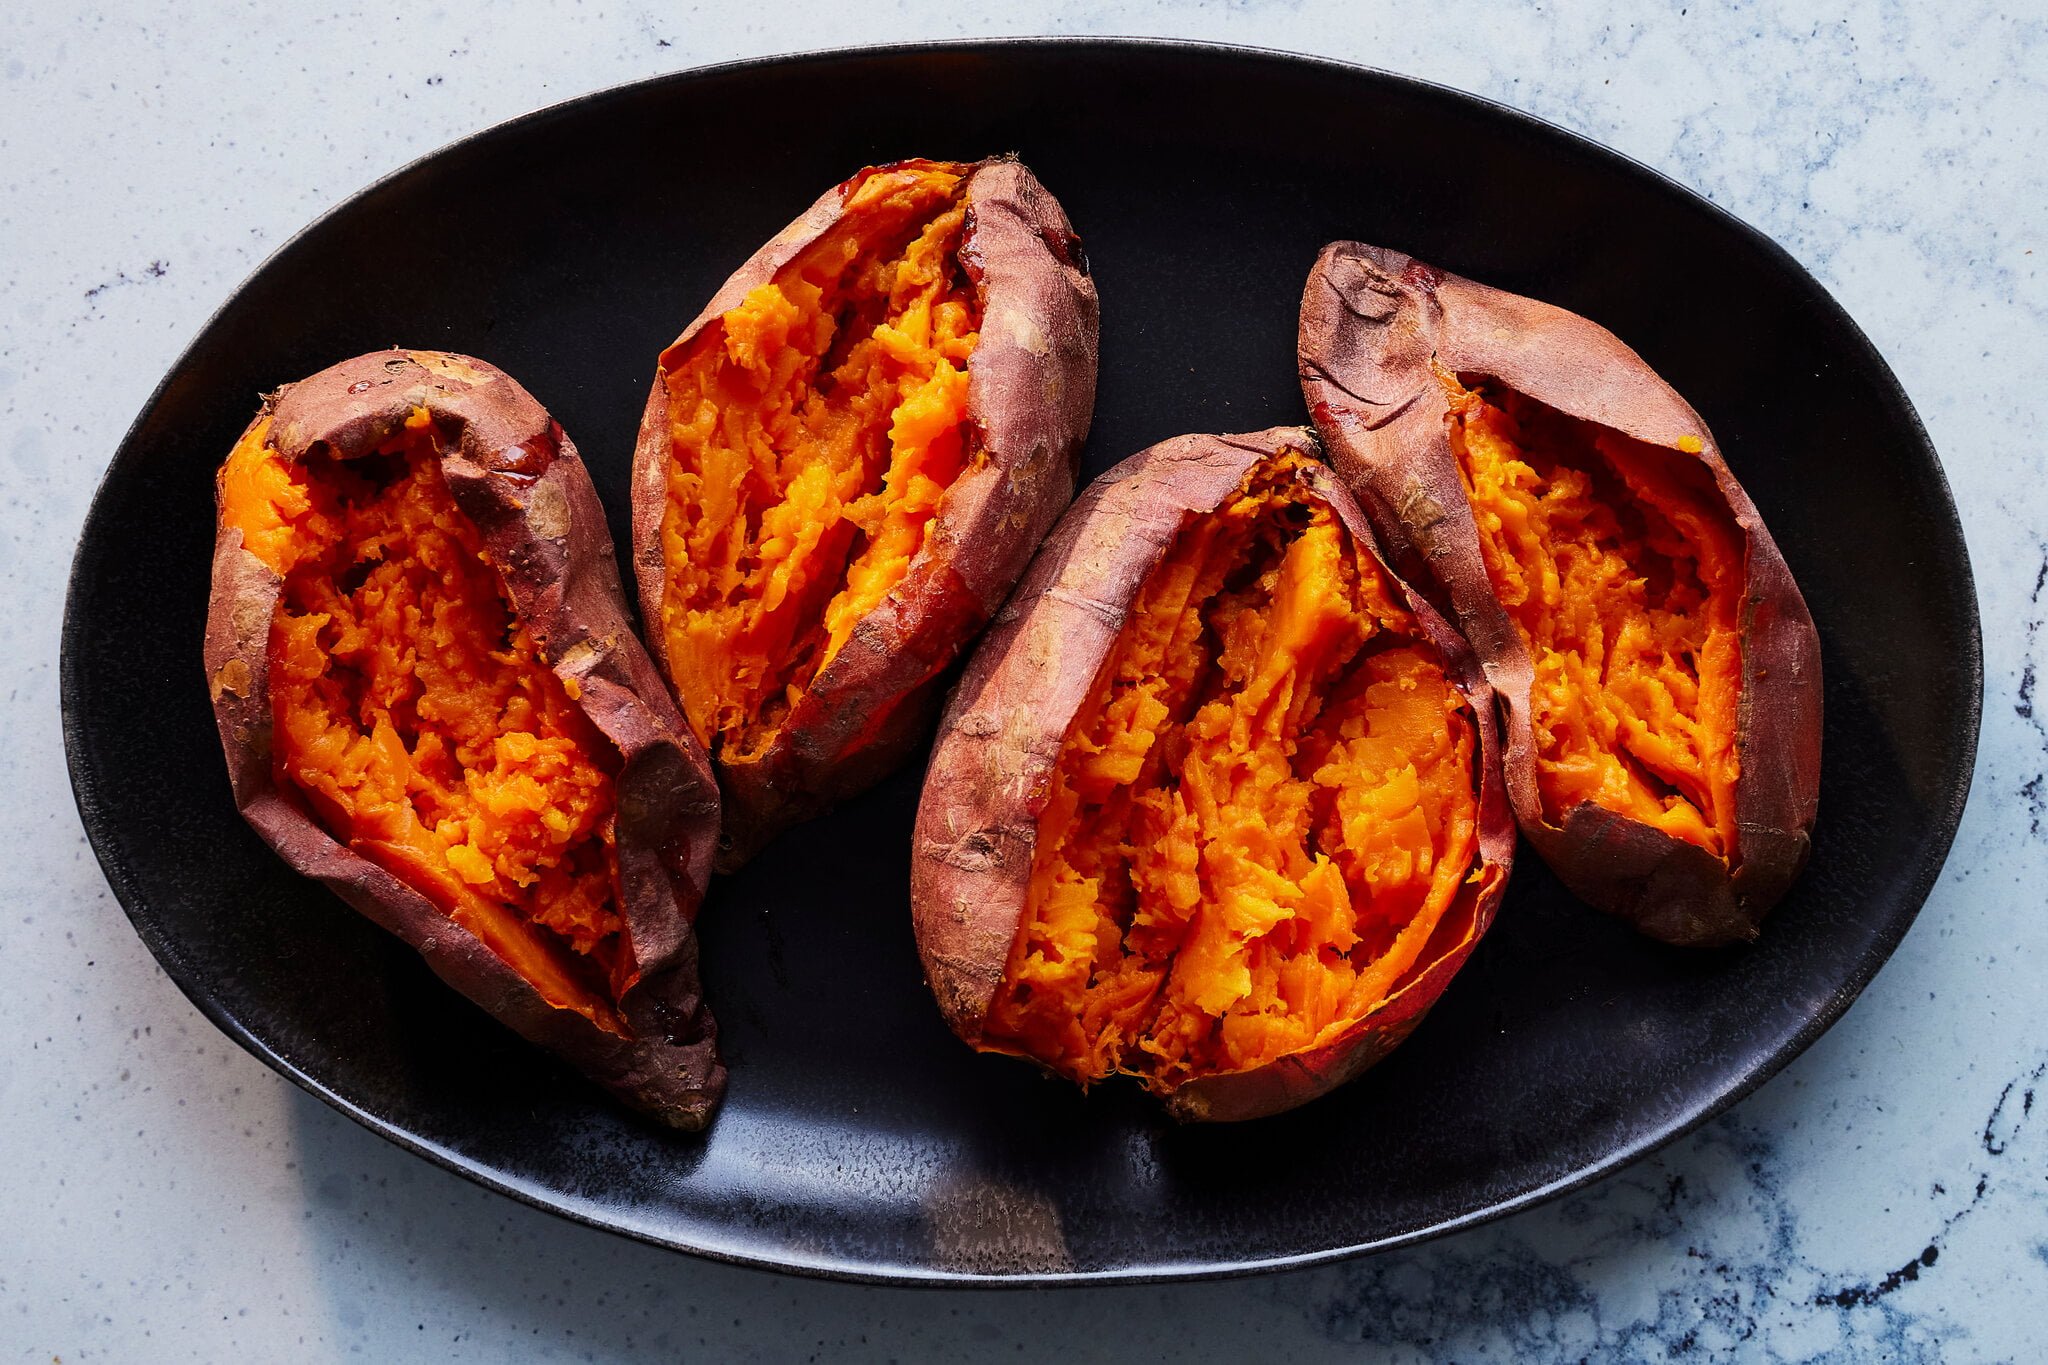 Calorie Count Associated with Baked Sweet Potatoes